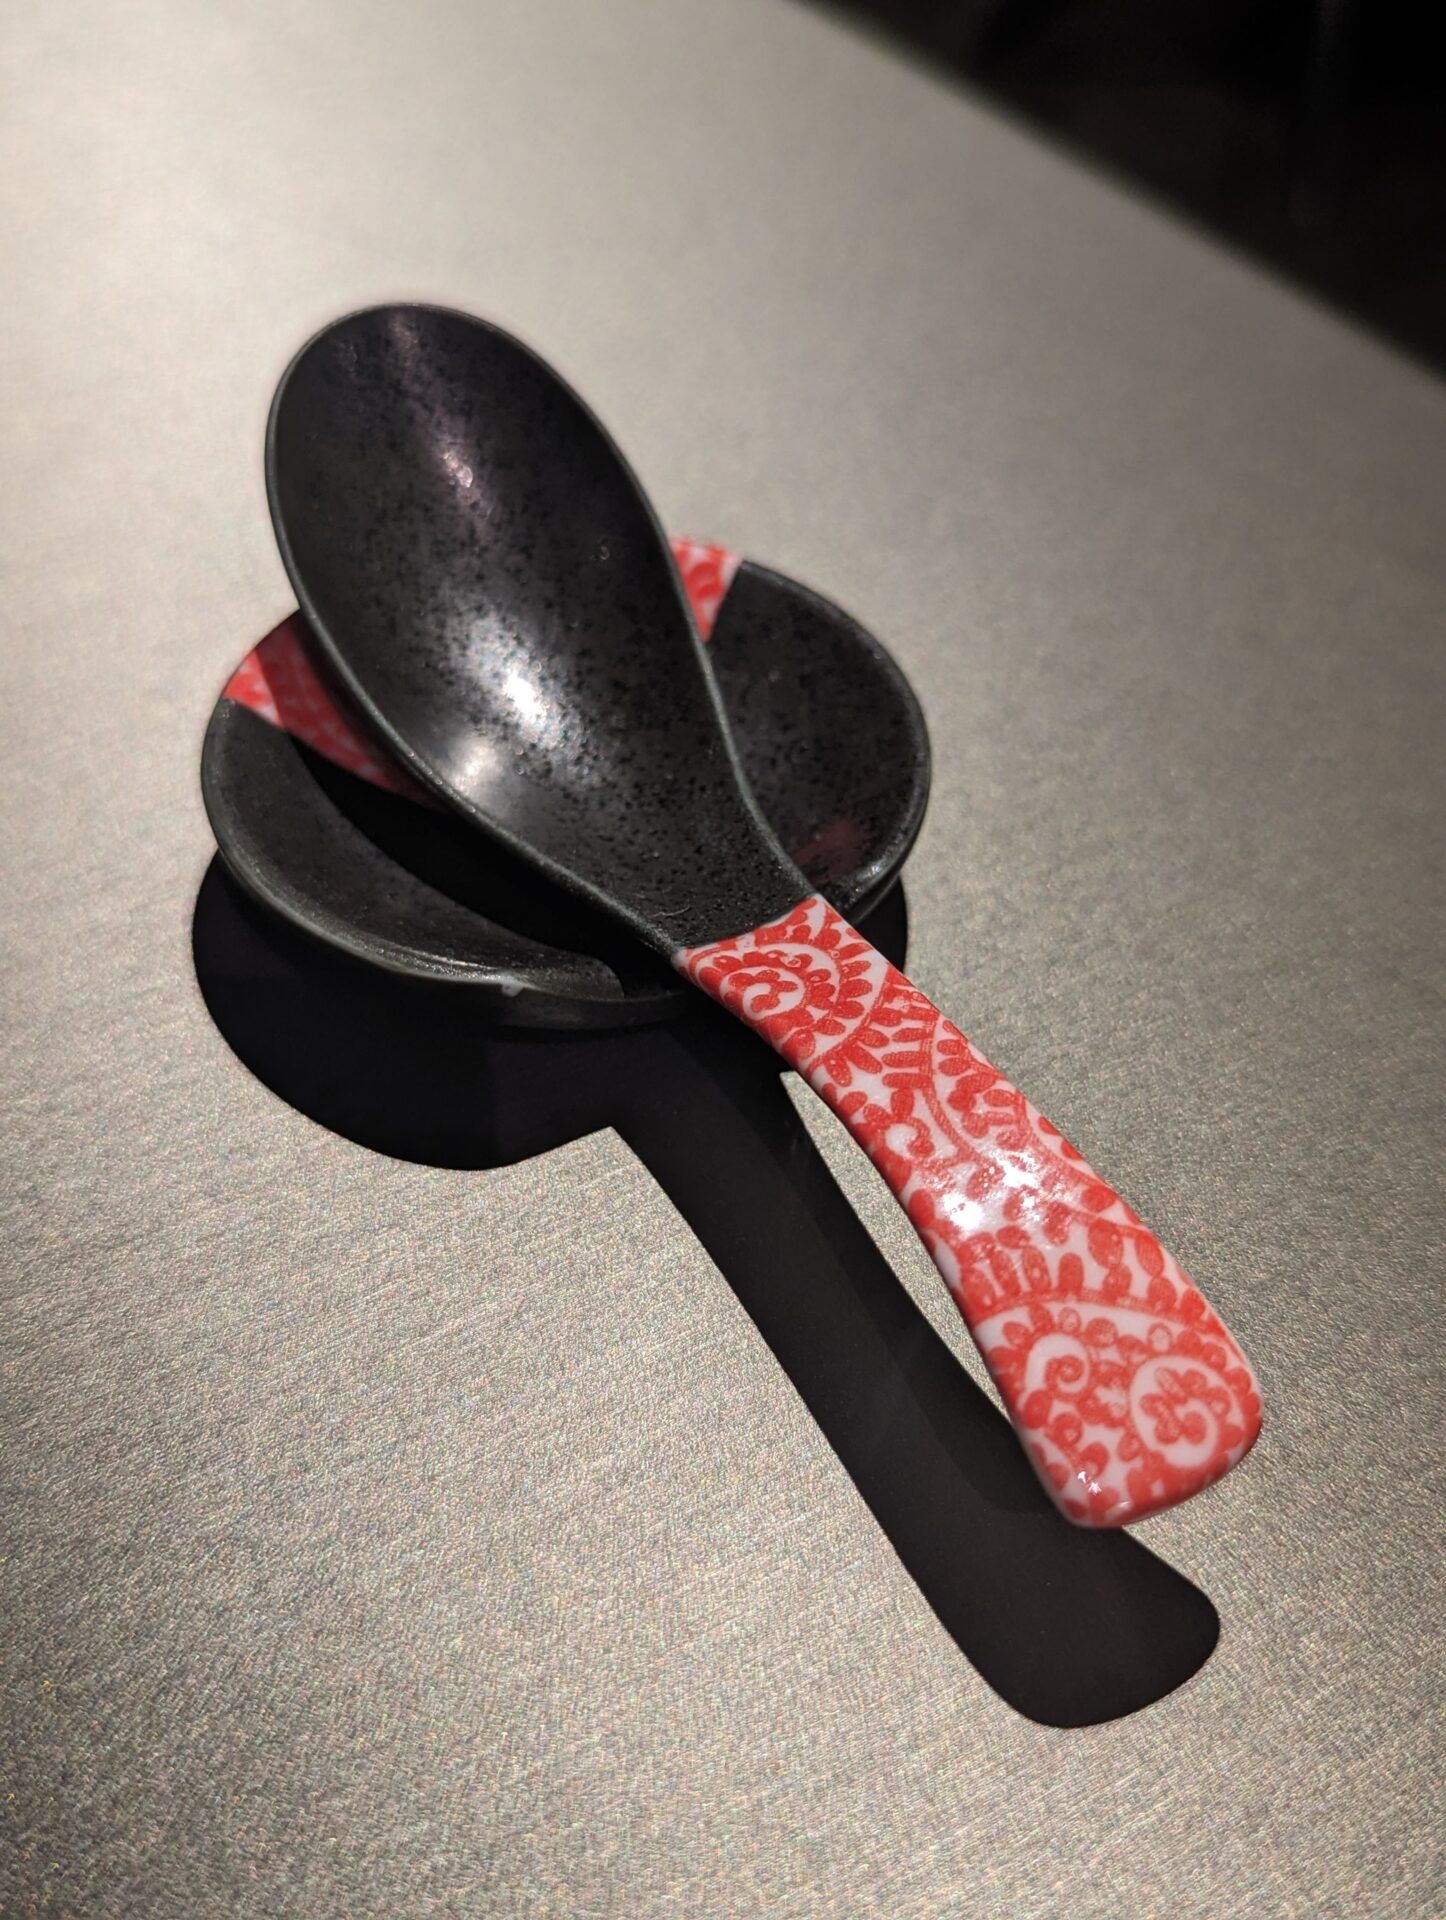 a spoon and bowl on a table